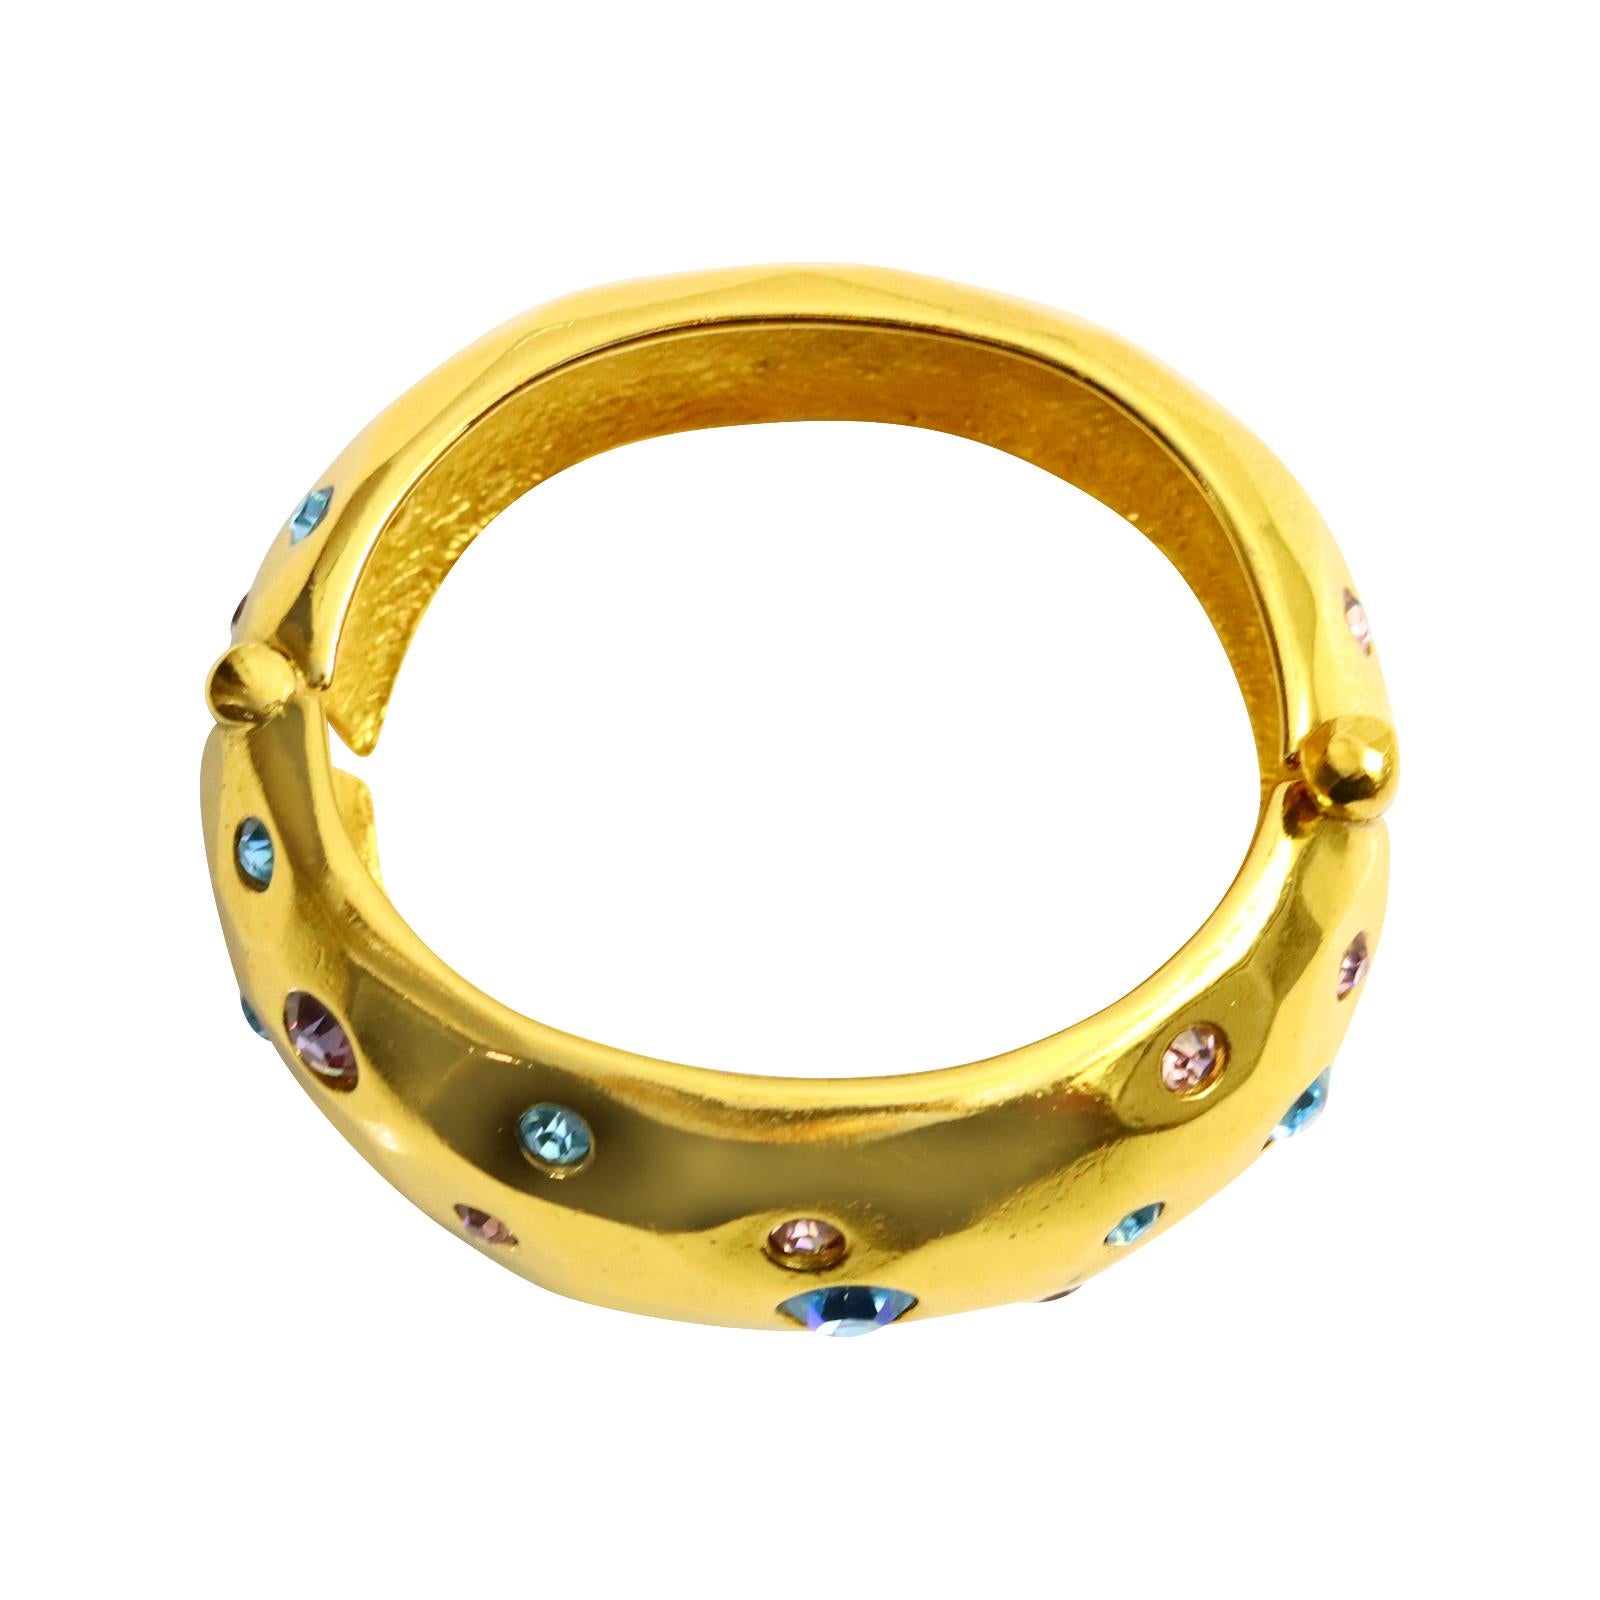 Vintage Yves Saint Laurent YSL Gold Tone Rounded Bracelet Cuff Circa 1990s In Good Condition For Sale In New York, NY